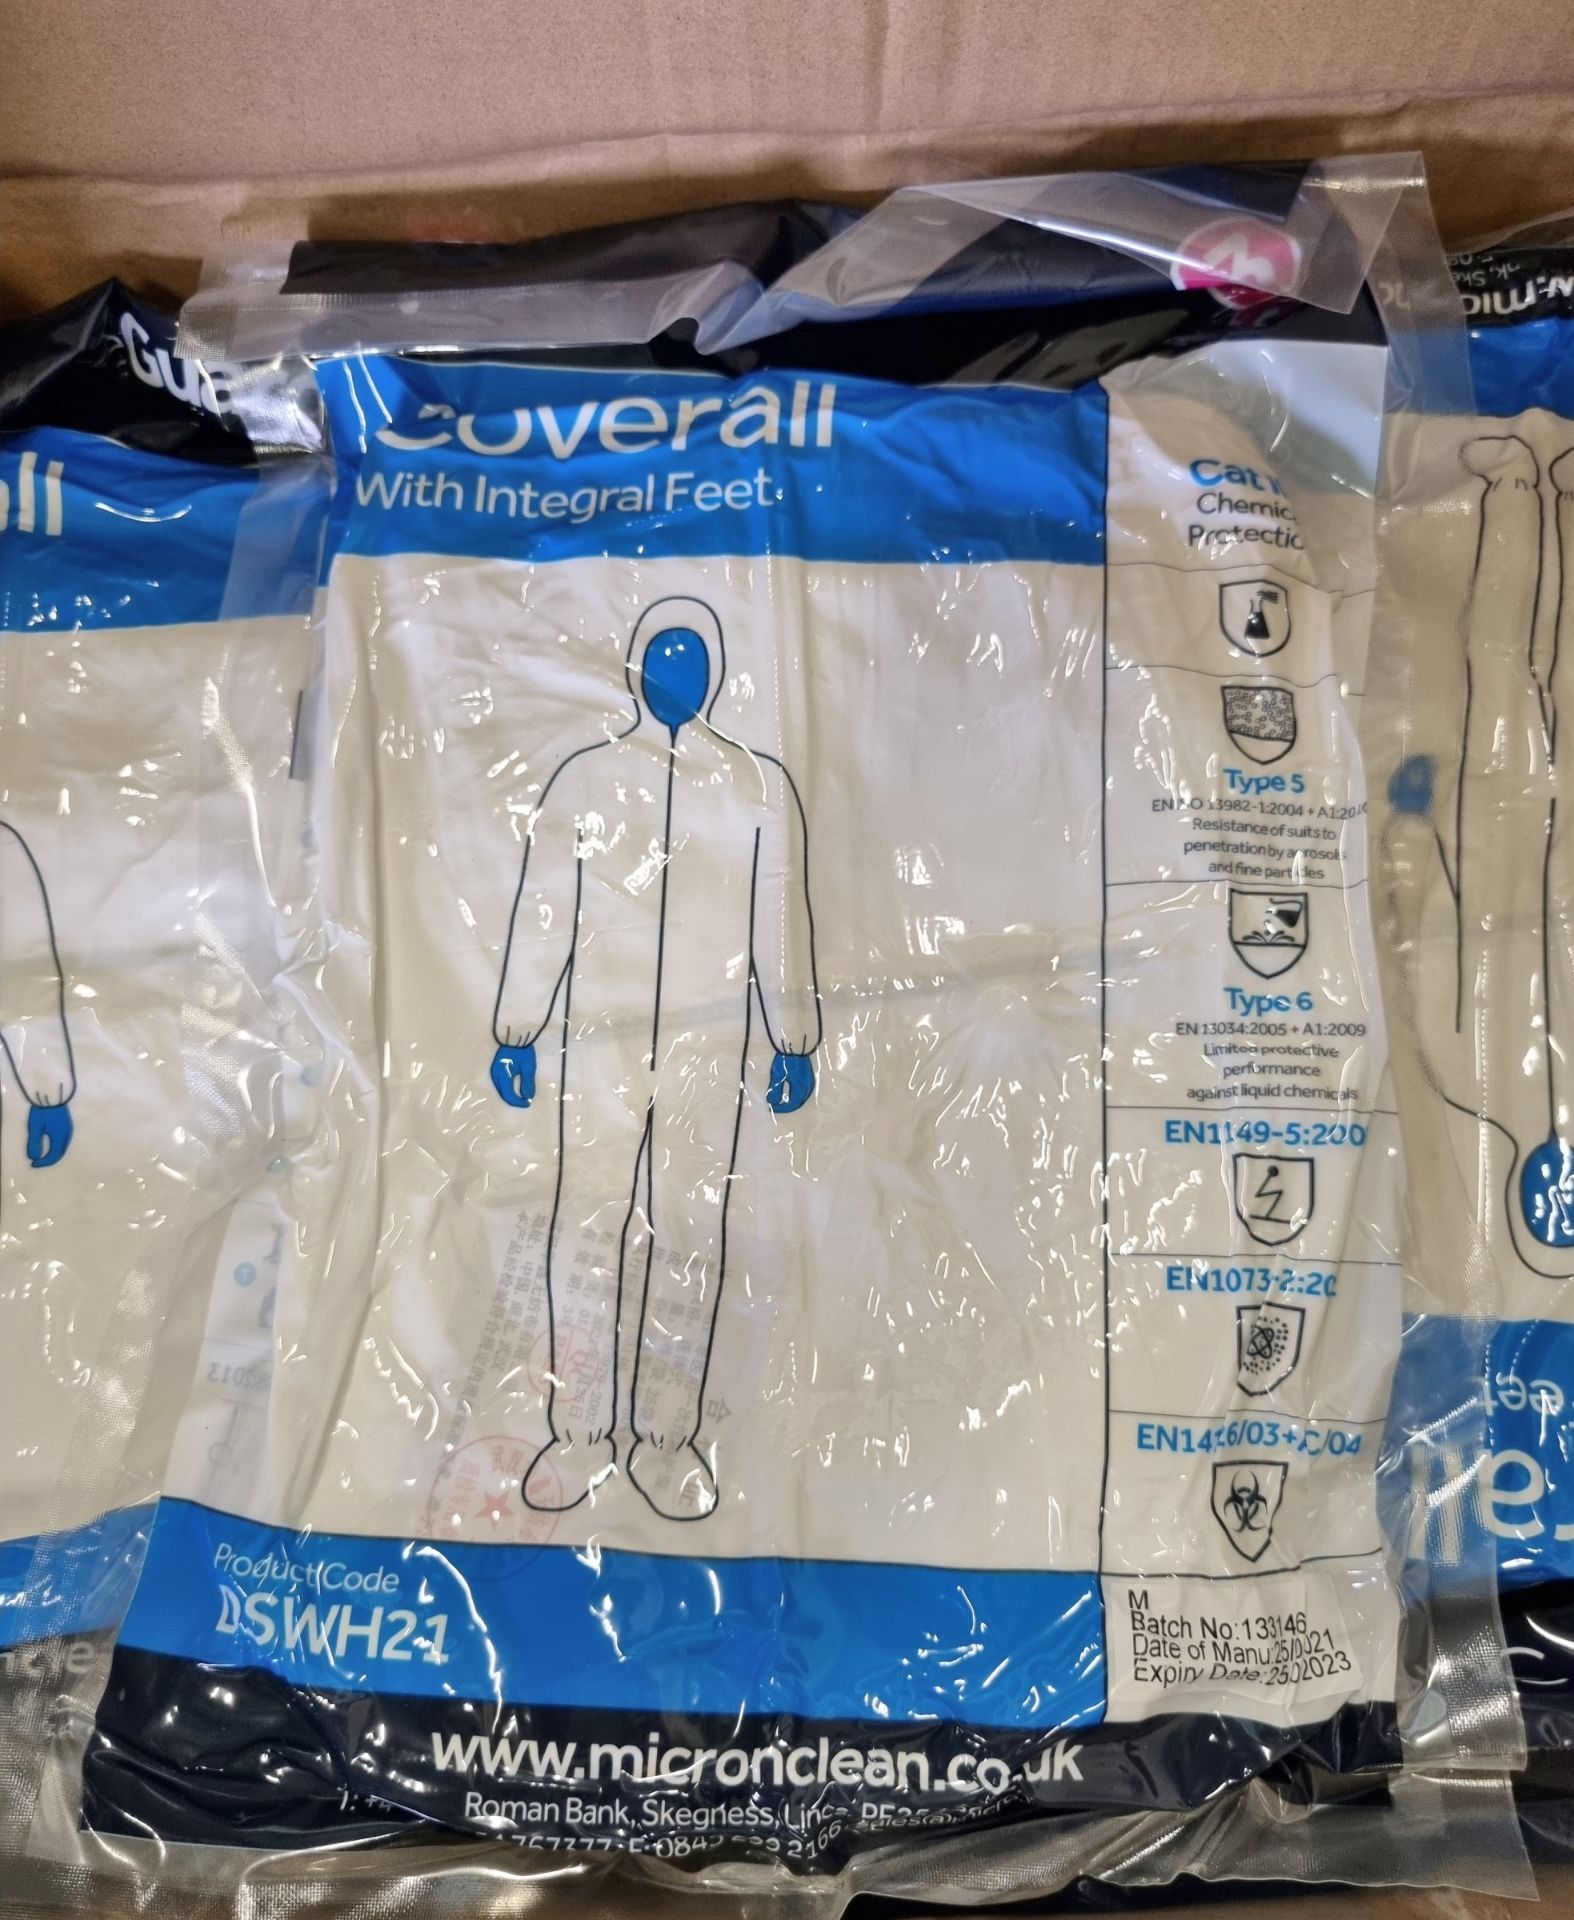 5x boxes of MicroClean SureGuard 3 - size Medium coverall with integral feet - 25 units per box - Bild 5 aus 6